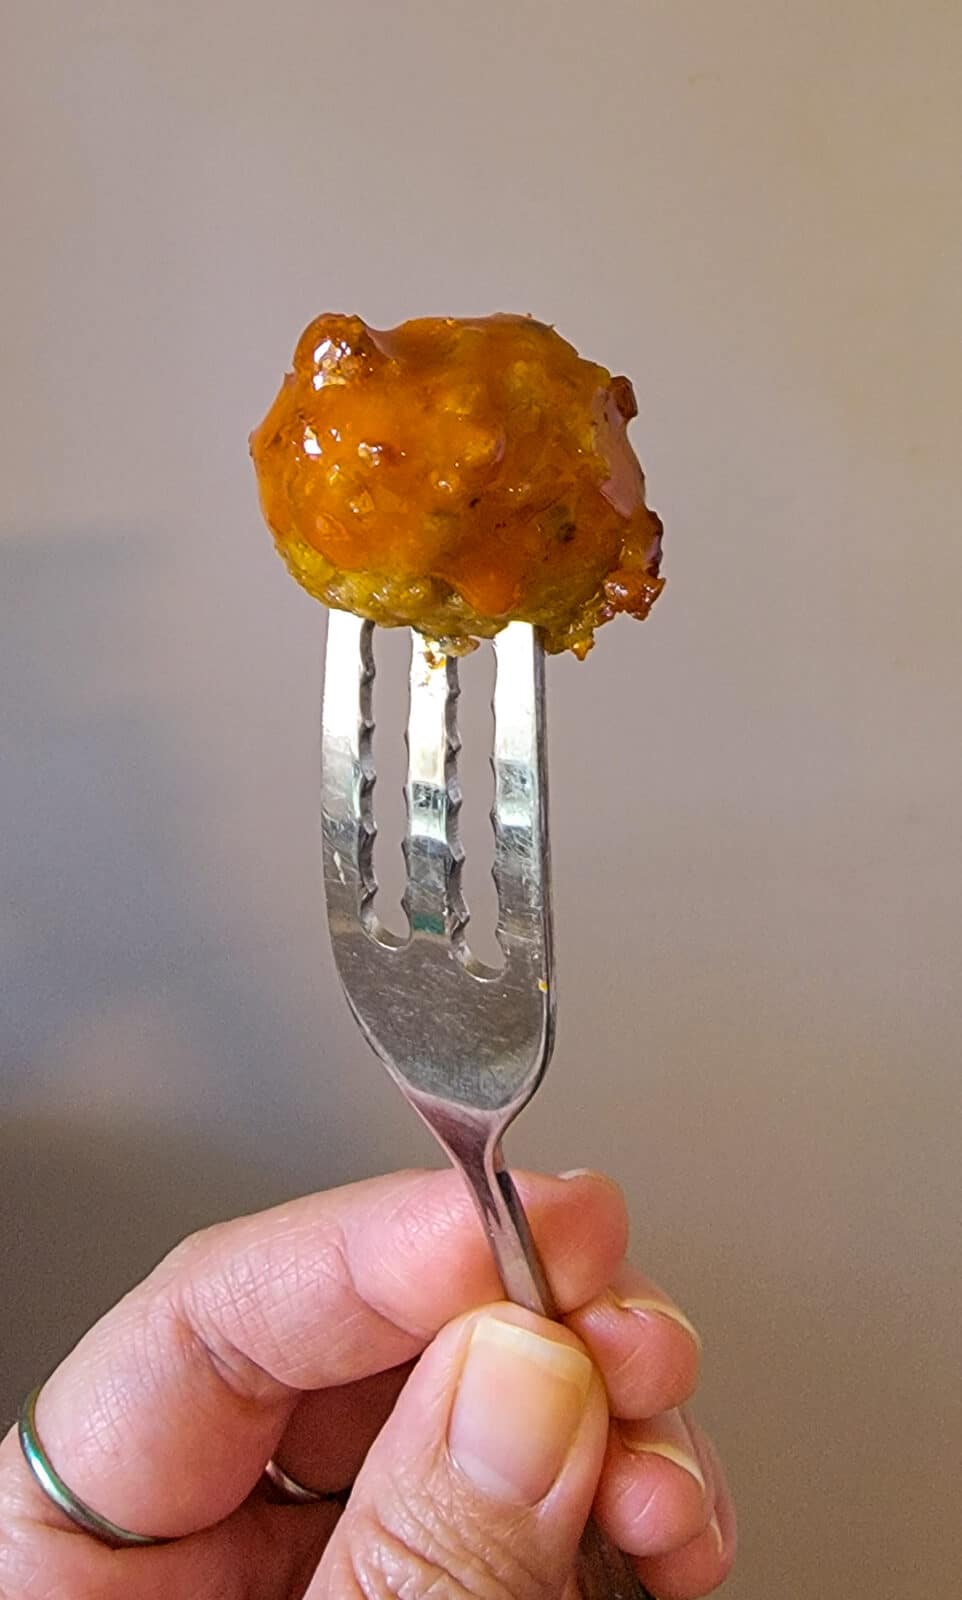 Chicken wing meatball with hot sauce